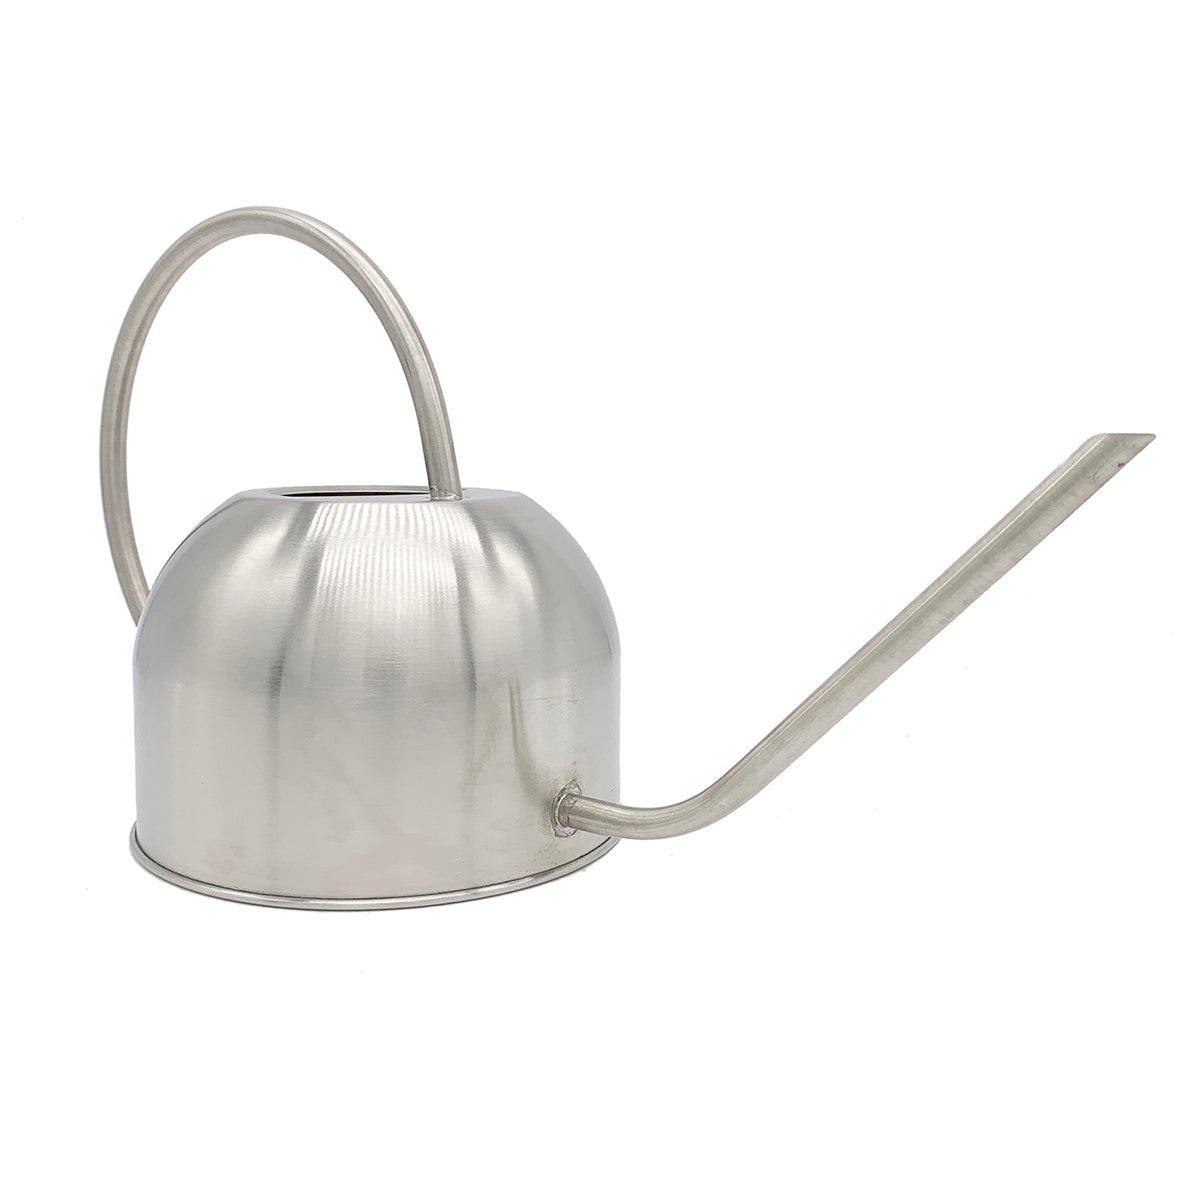 Ferry-Morse Stainless Steel 1.2L Watering Can